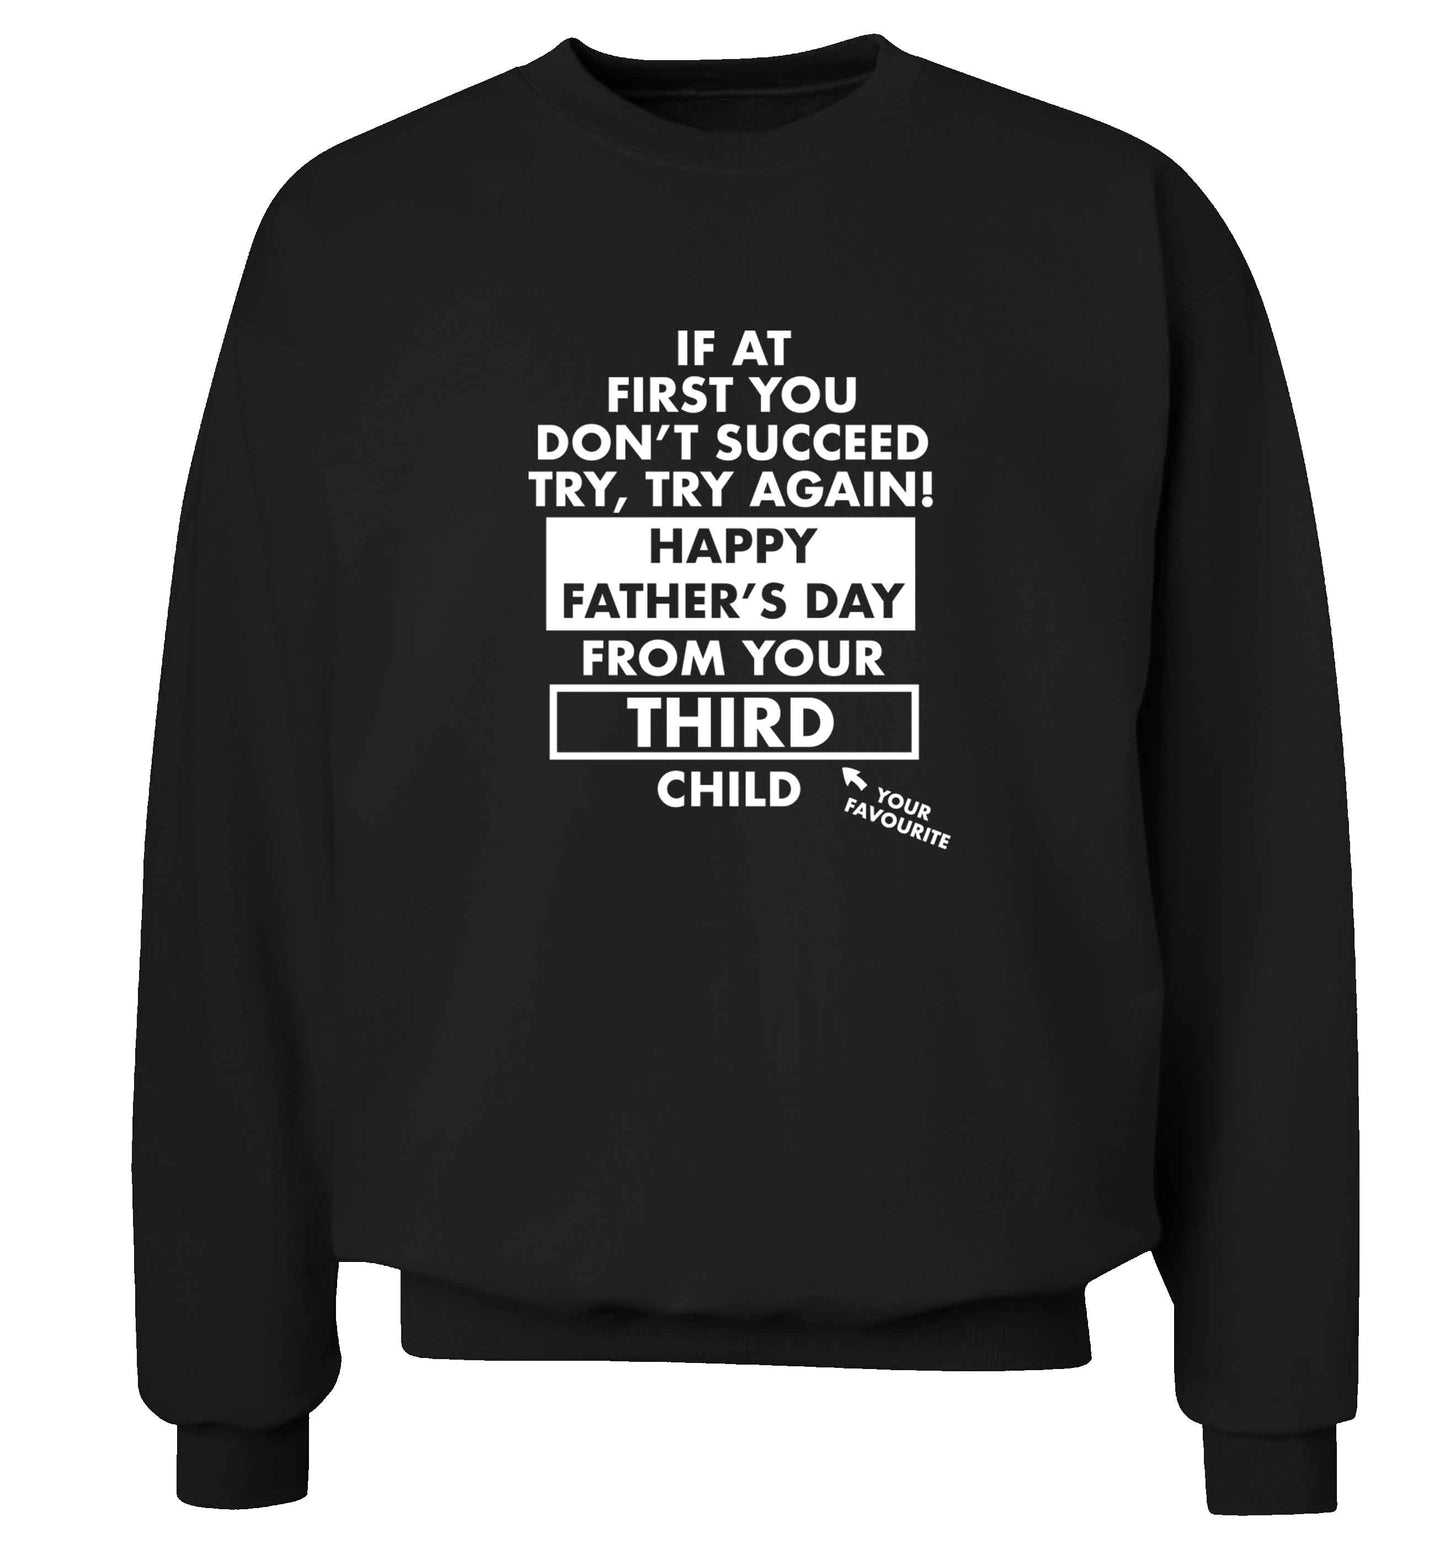 If at first you don't succeed try, try again Happy Father's day from your third child! adult's unisex black sweater 2XL